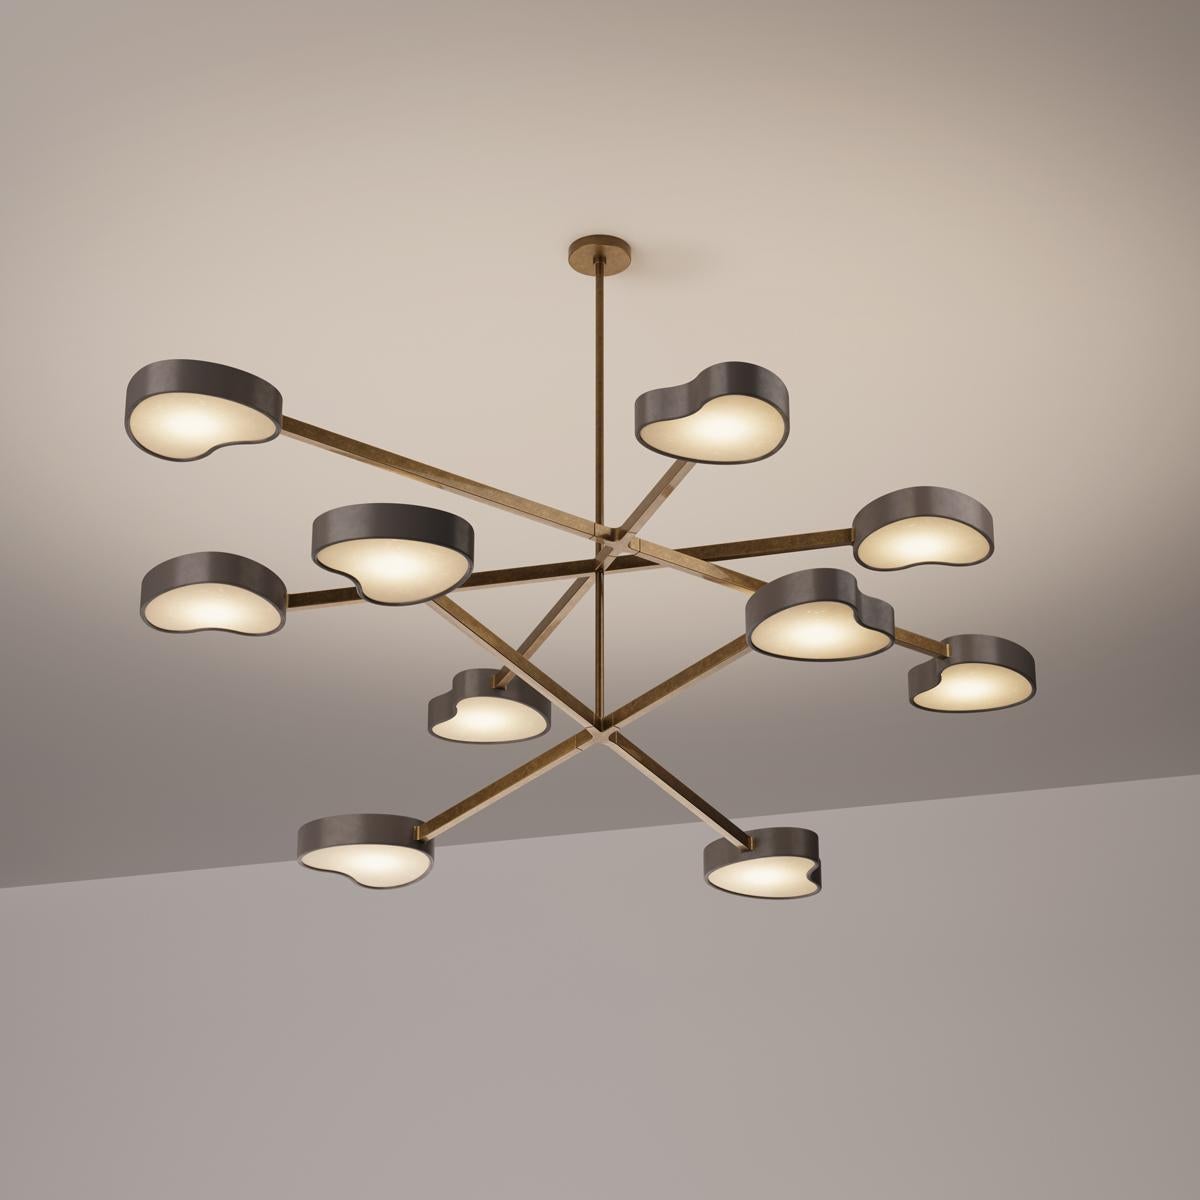 Modern Cuore N.10 Ceiling Light by Gaspare Asaro. Peltro and Bronze Finish For Sale